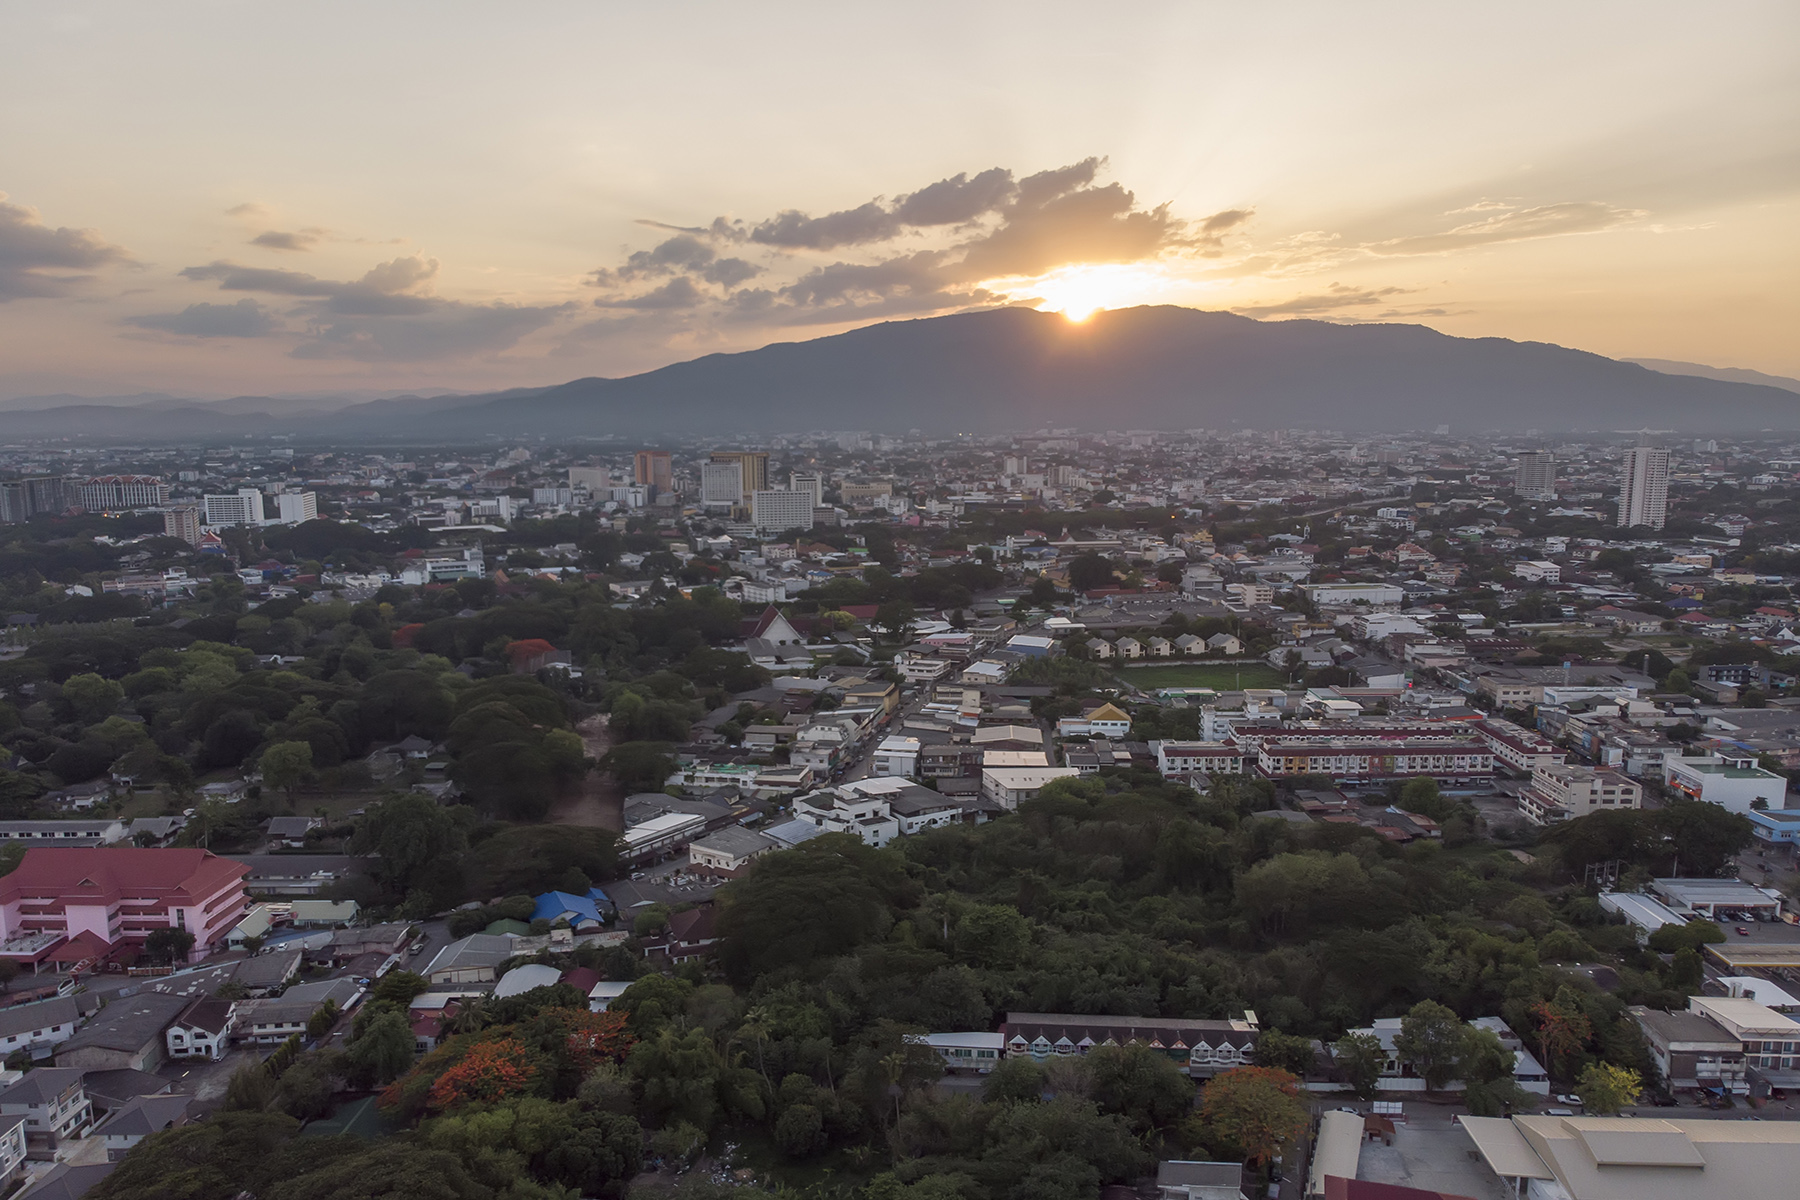 Aerial view of Chiang Mai at sunset or sunrise across the mountains